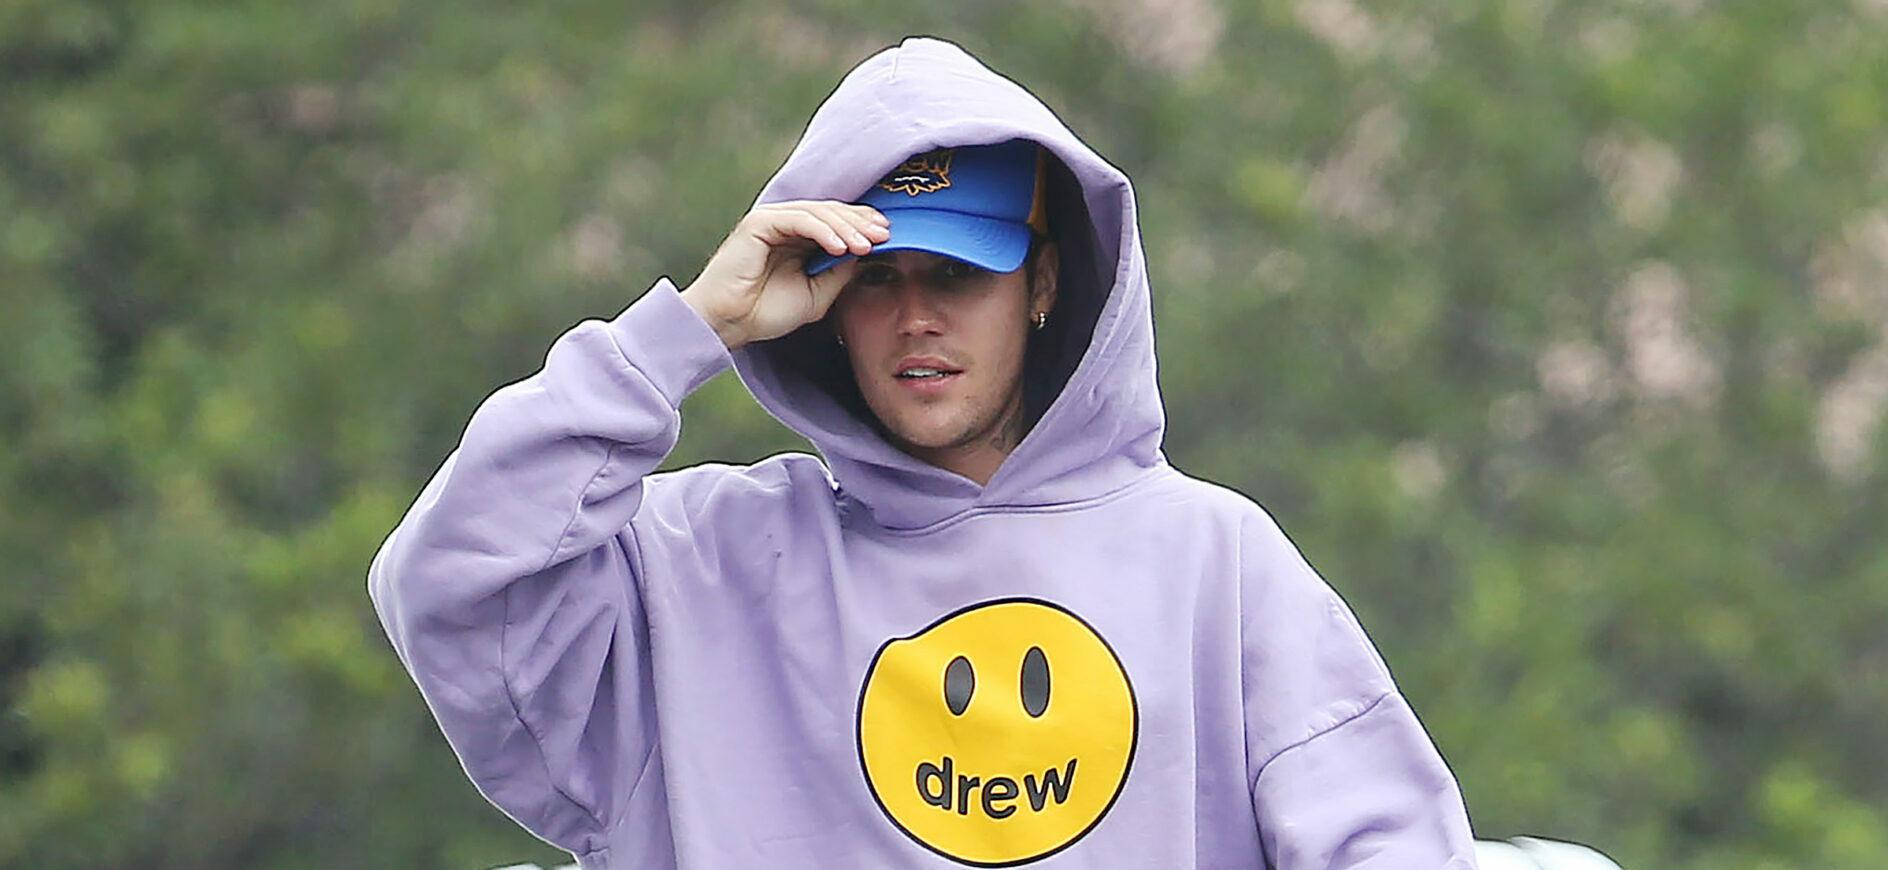 Justin Bieber Opens Up About His Struggles With Anxiety